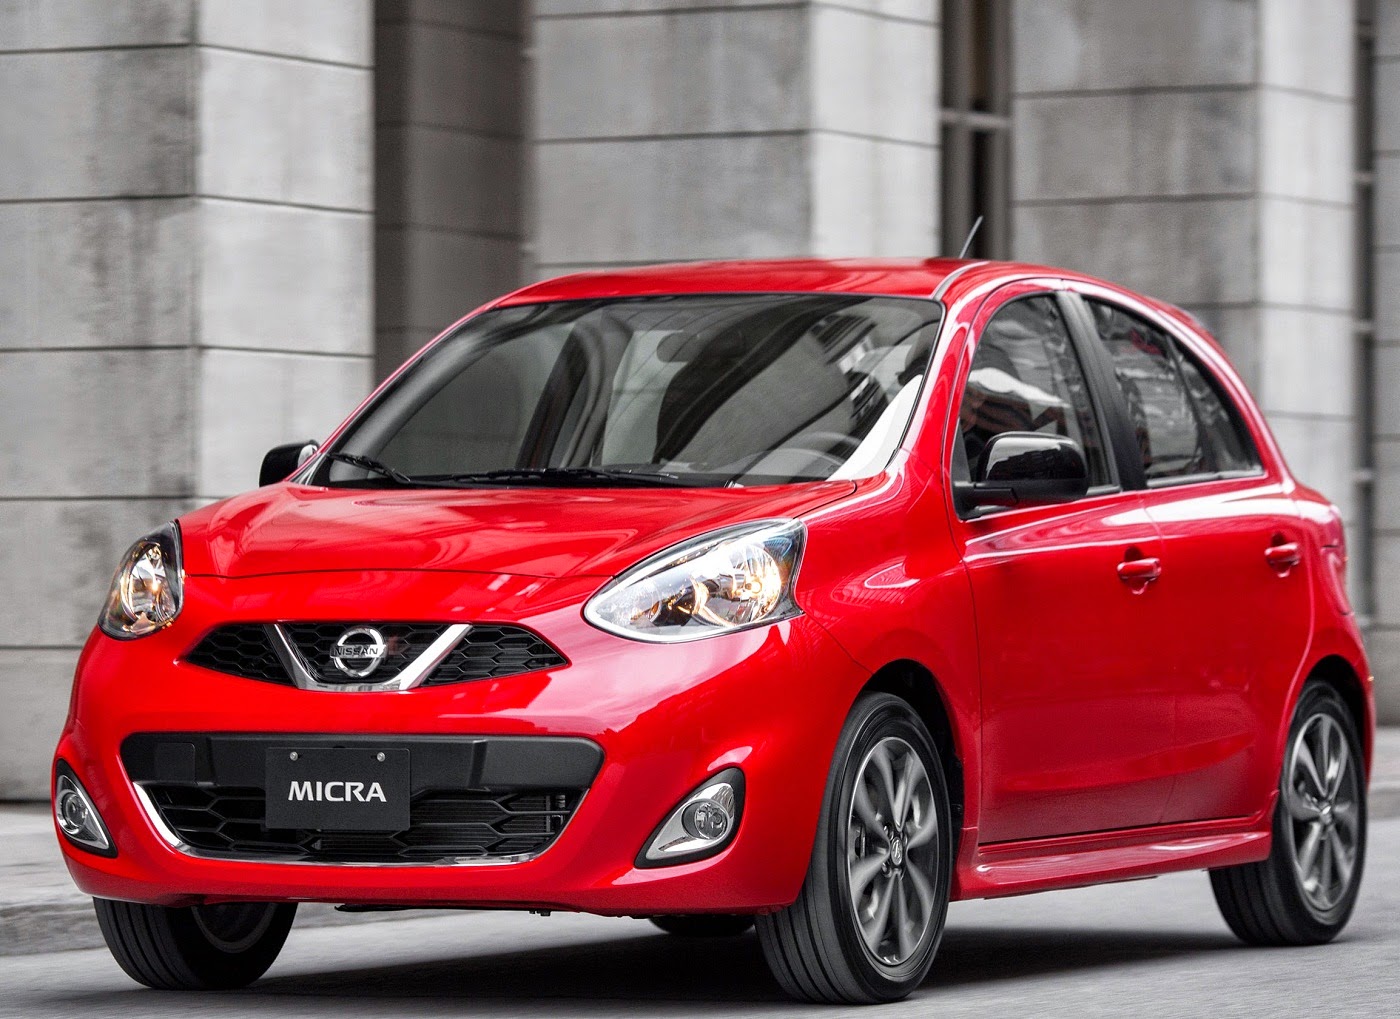 Cheapest car insurance for nissan micra #7